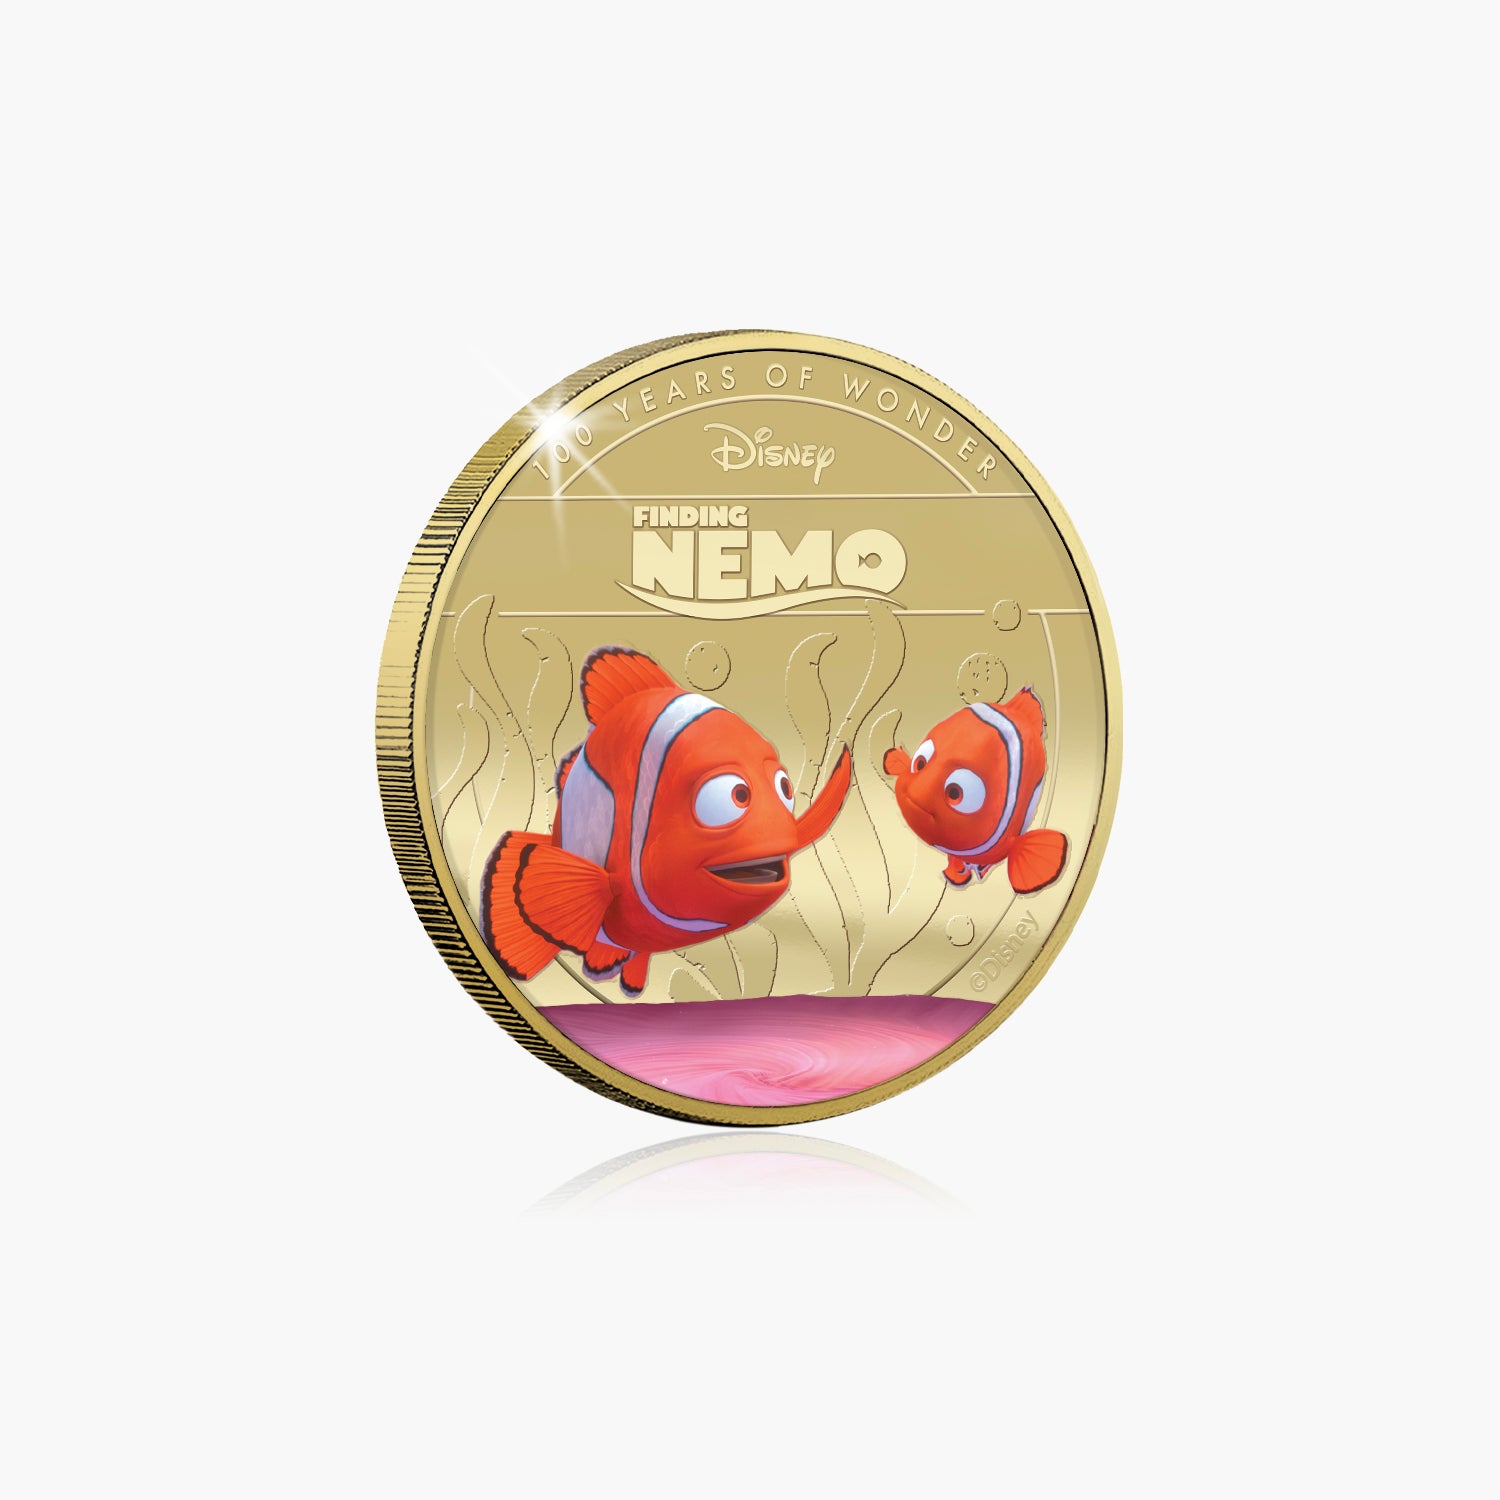 D100 Disney Finding Nemo Gold Plated Commemorative